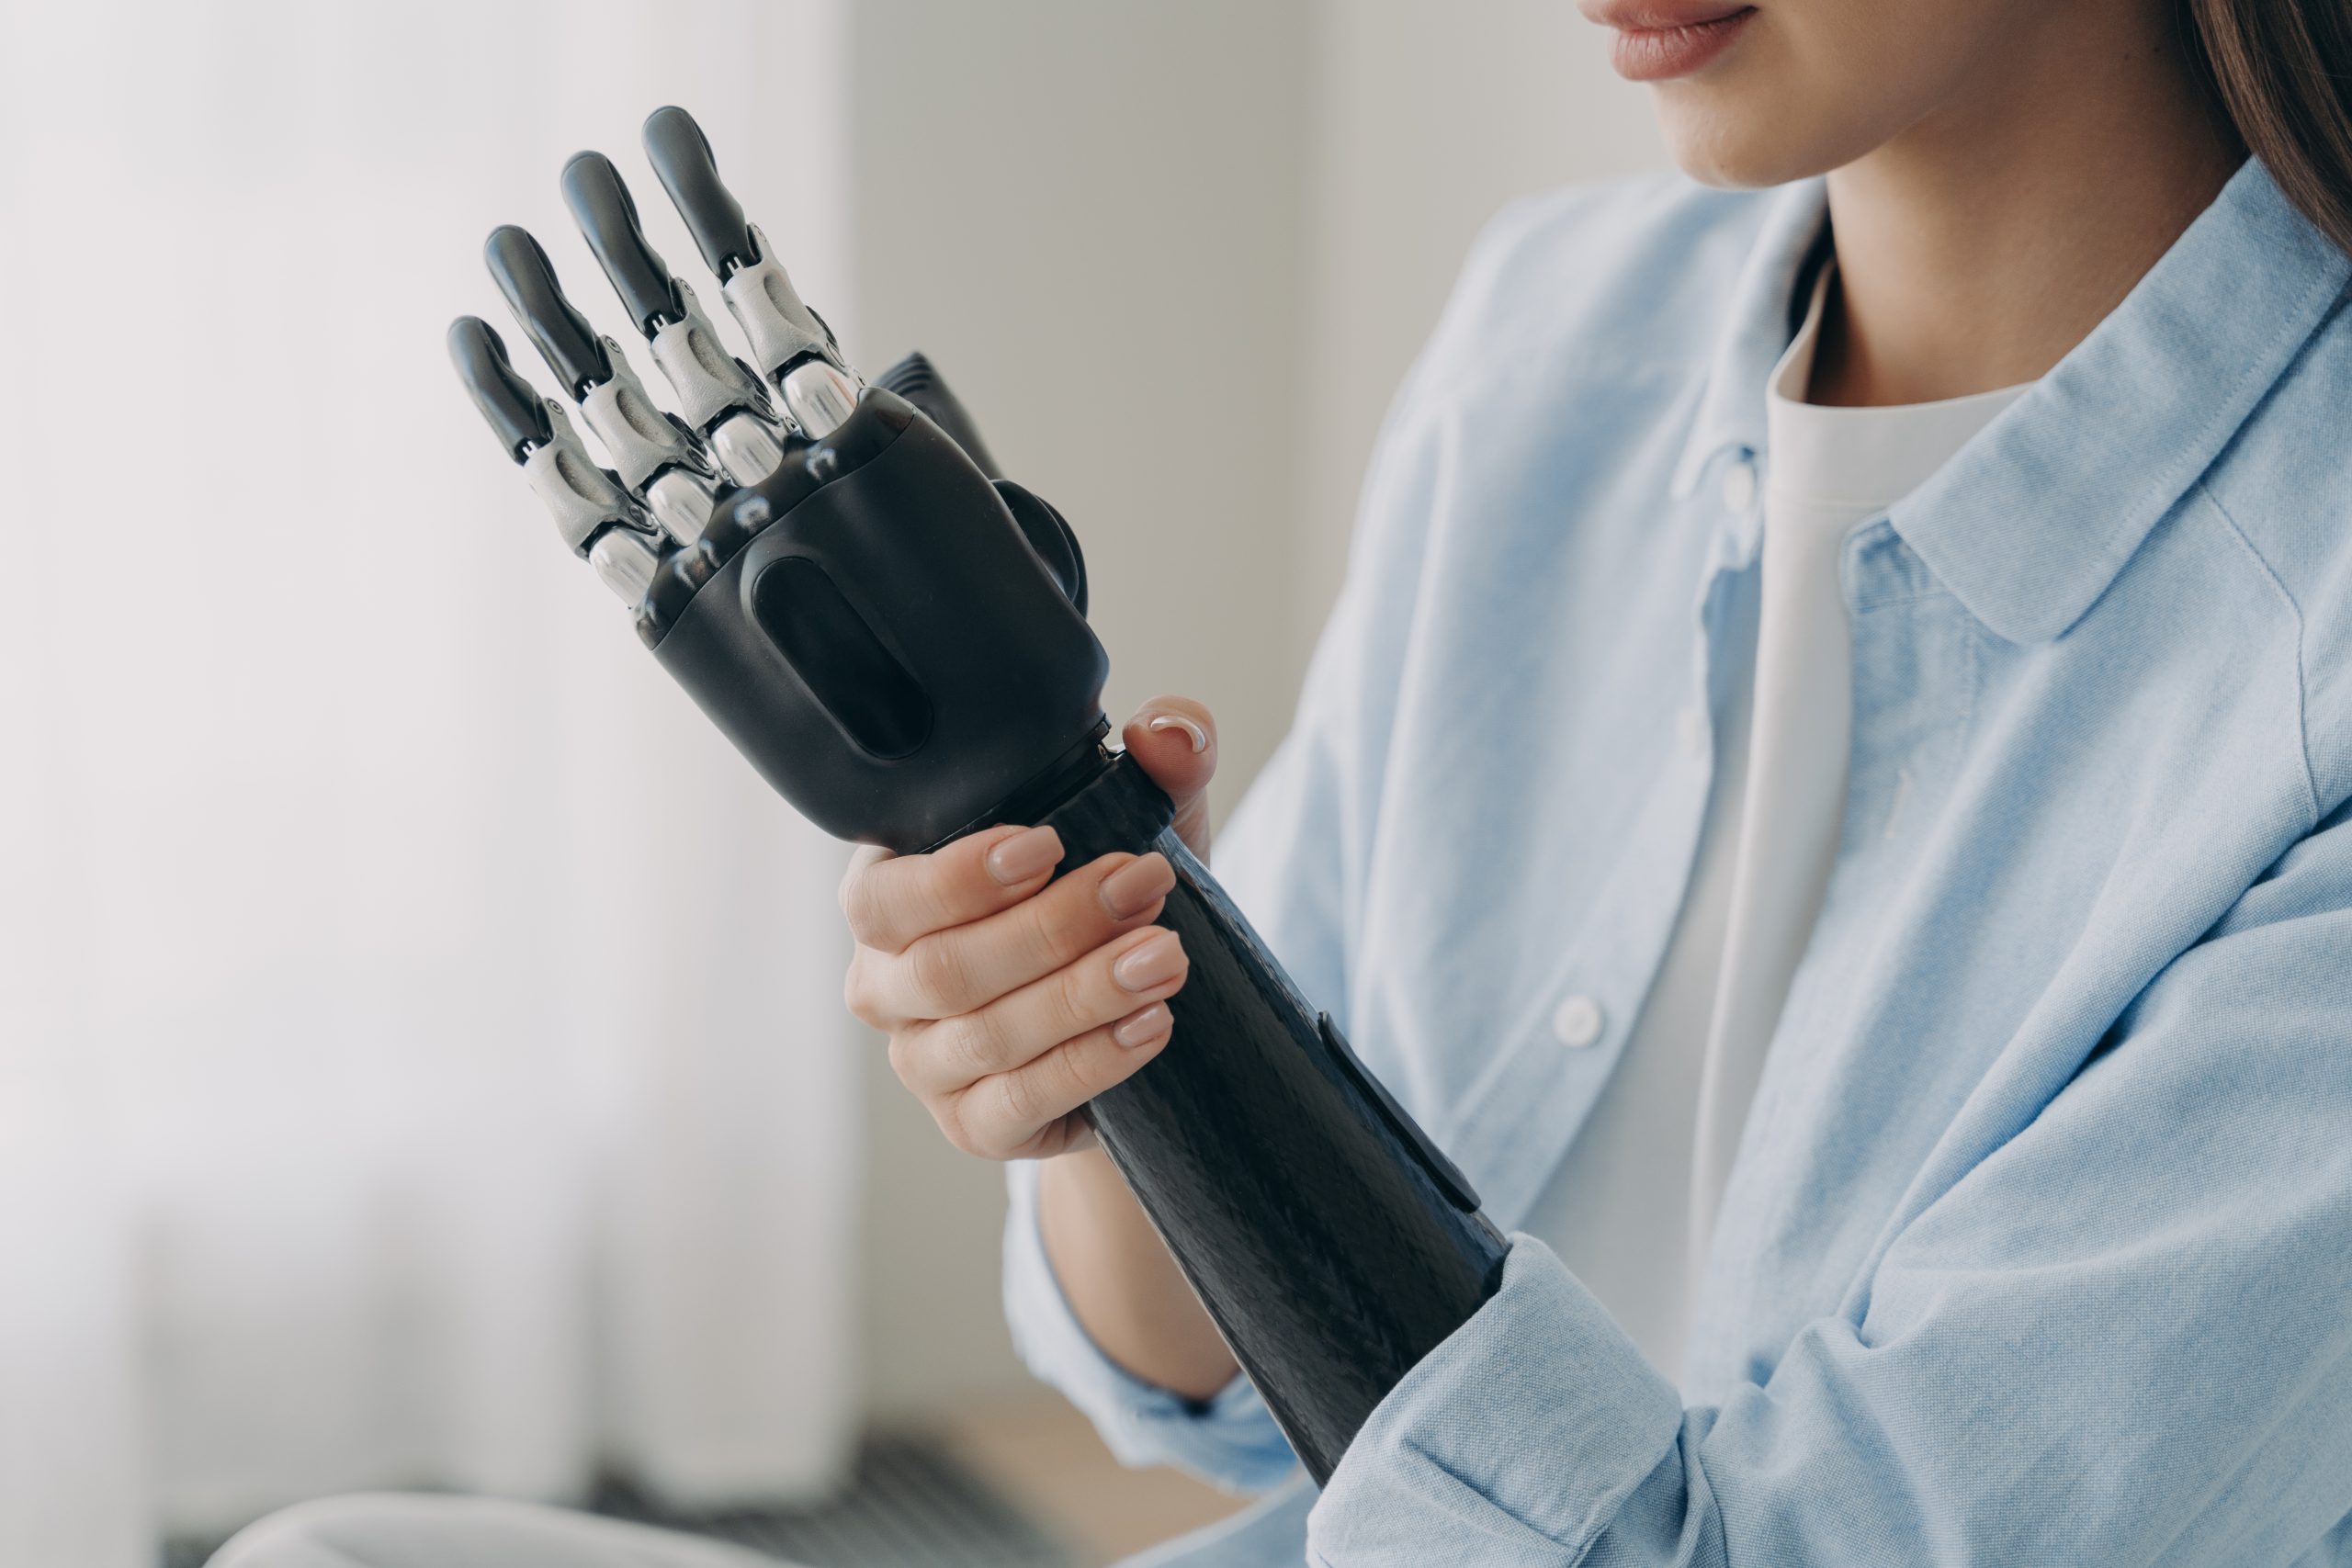 New Device Allows Prosthetic Hand to Sense Temperature - Image